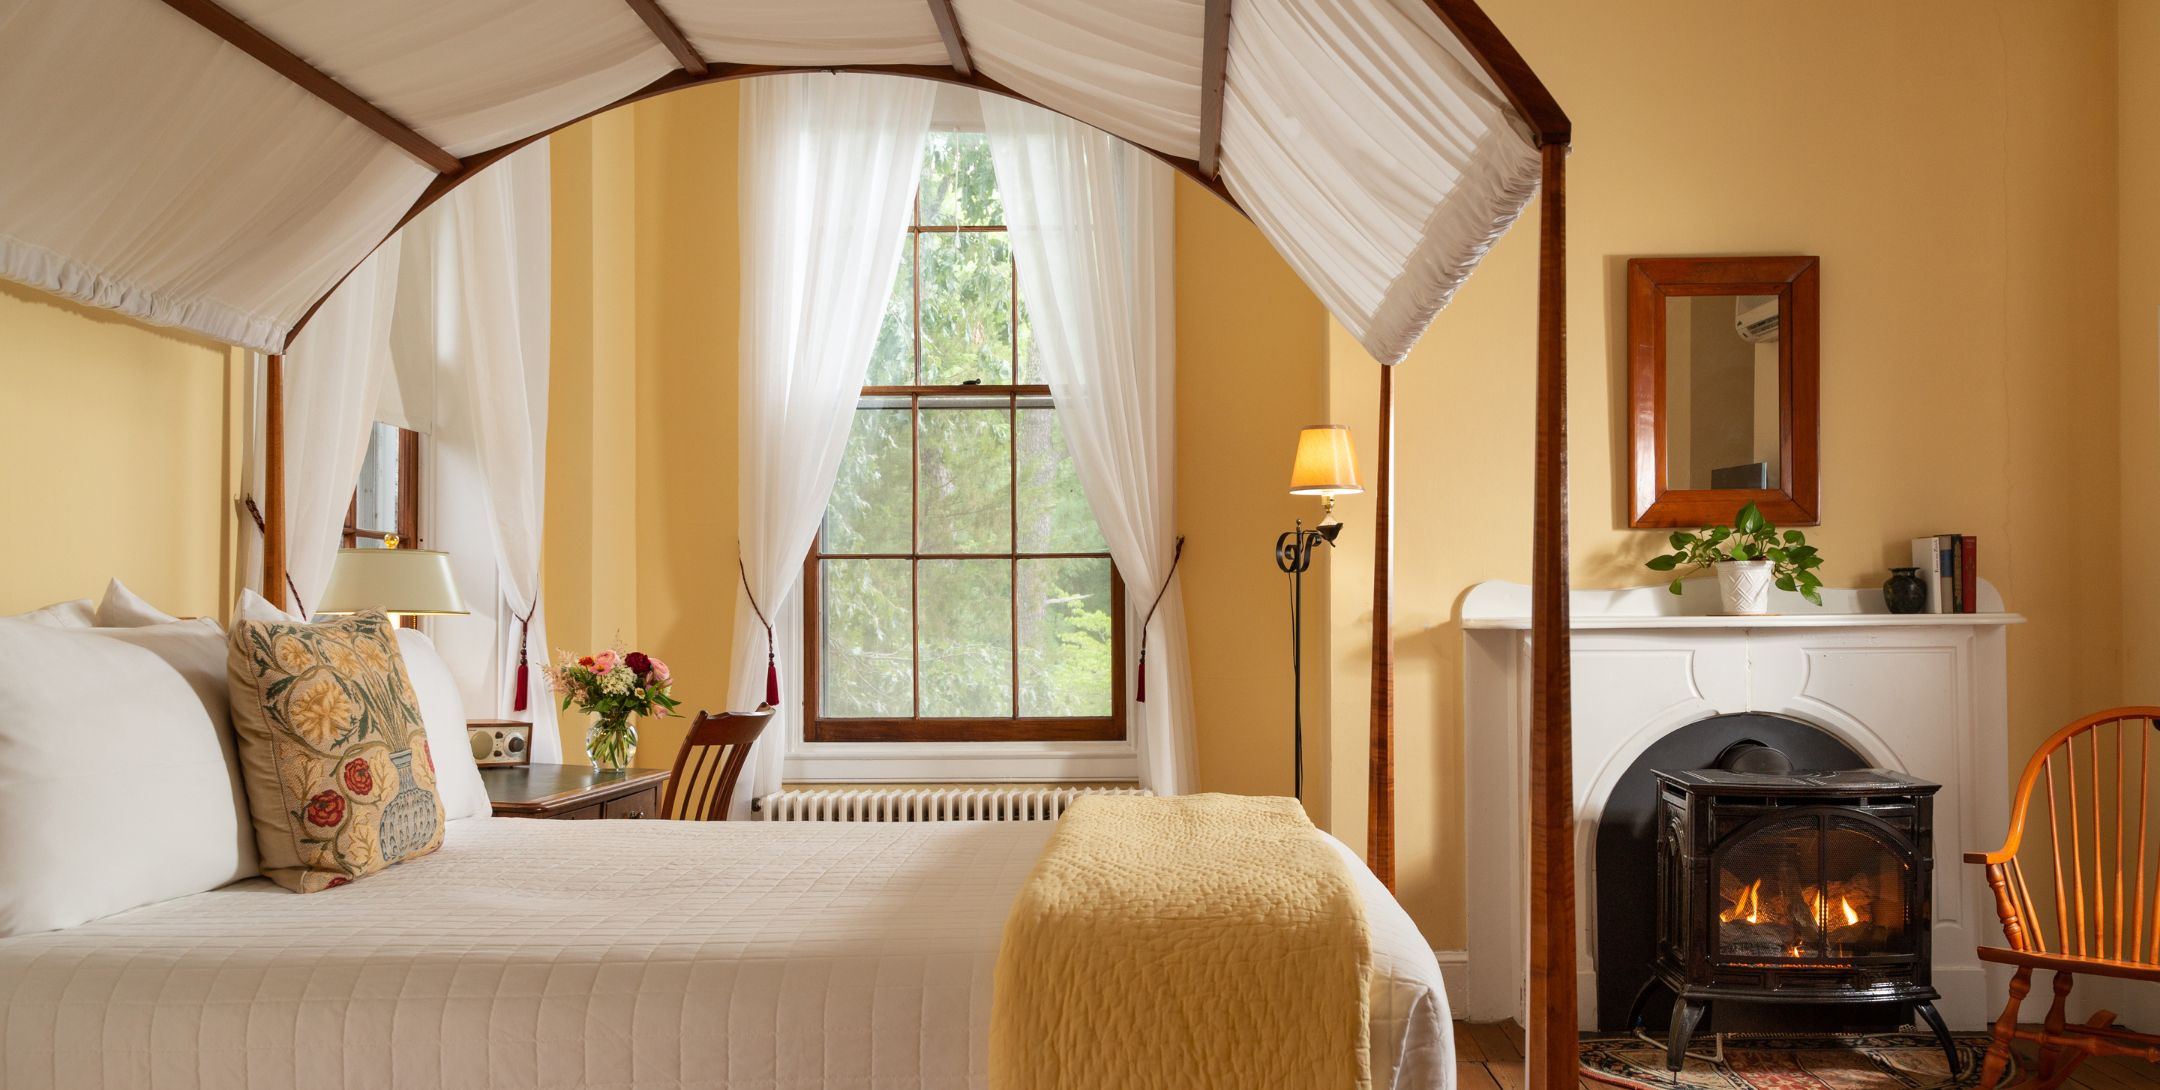 Close-up of canopy bed with white bedding and canopy, buttery yellow walls, and a desk near two windows with white shears